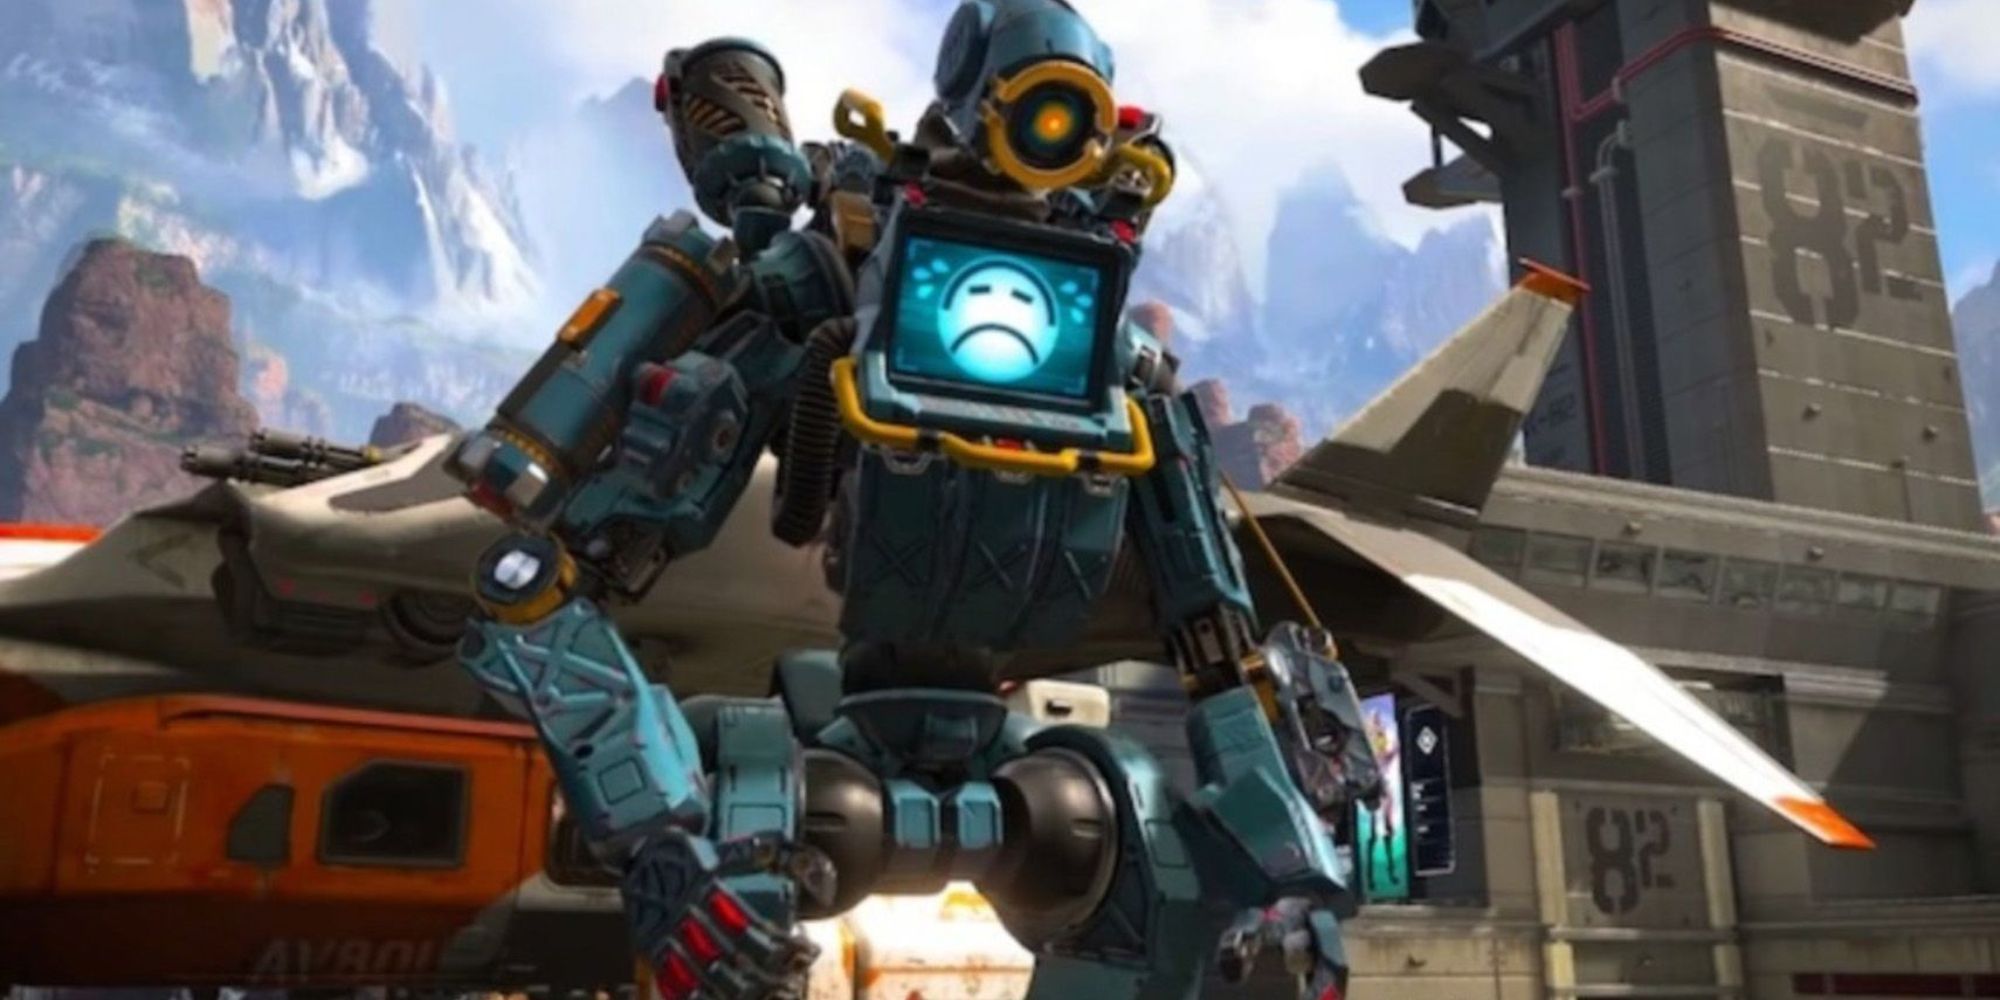 Apex Legends - Pathfinder stands with a blue sad face appearing on his monitor